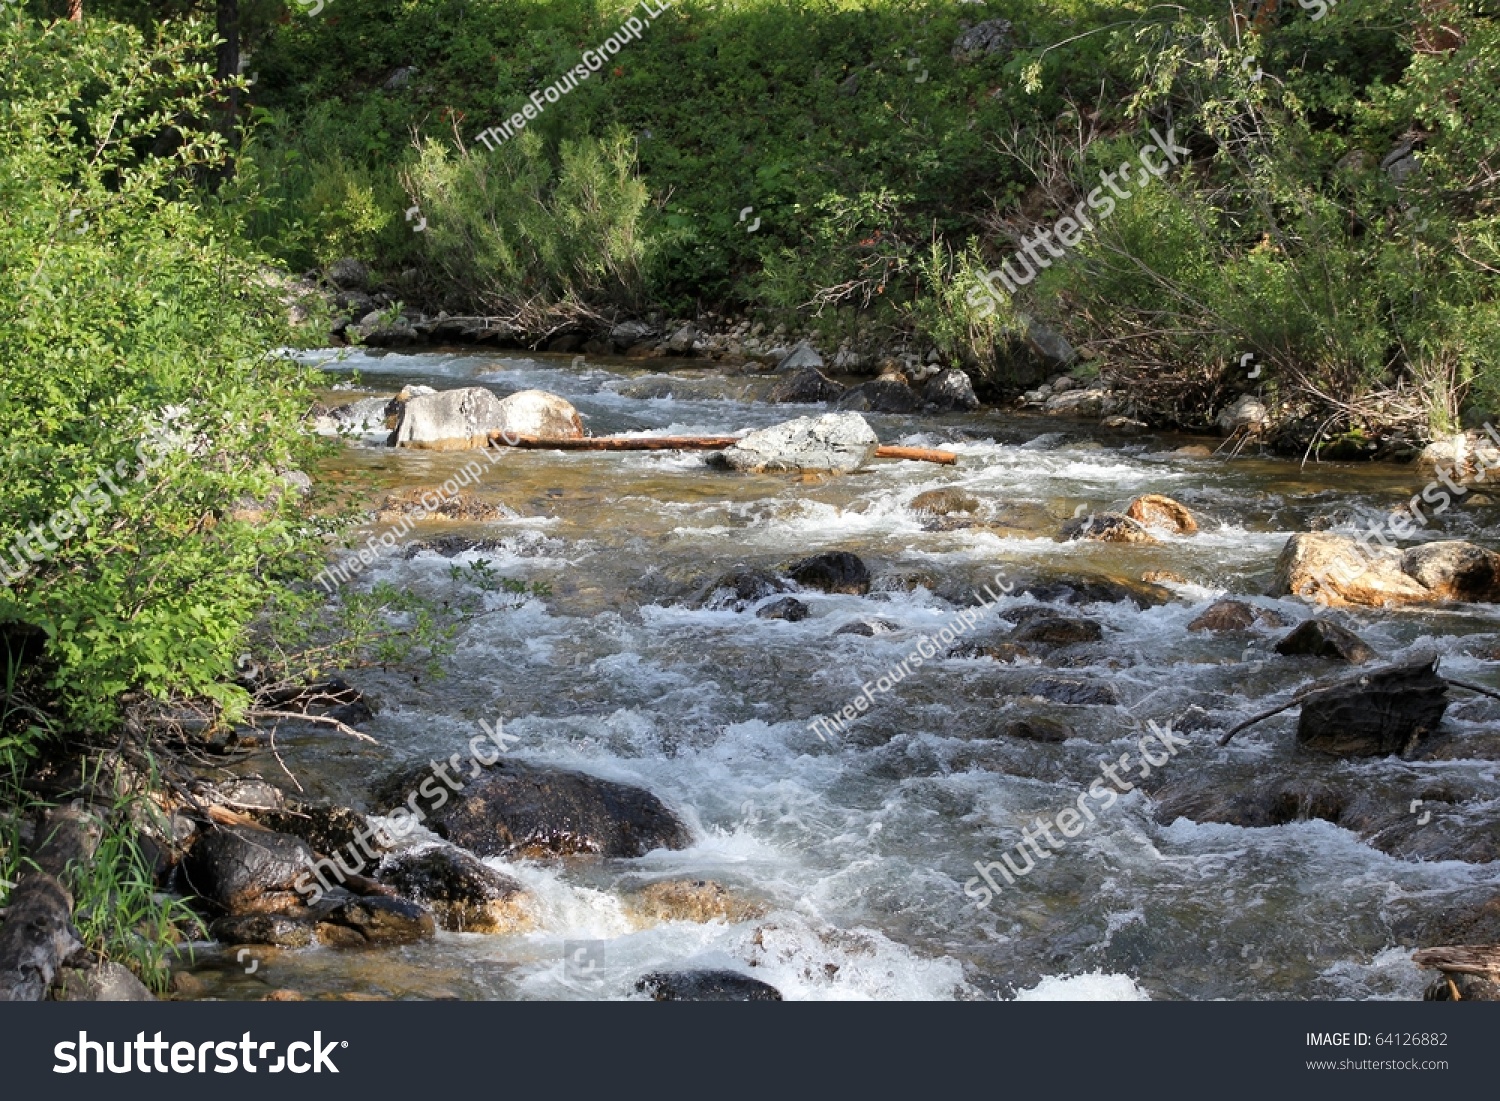 Running Stream With Rocks, Grass, And Bushes Stock Photo 64126882 ...